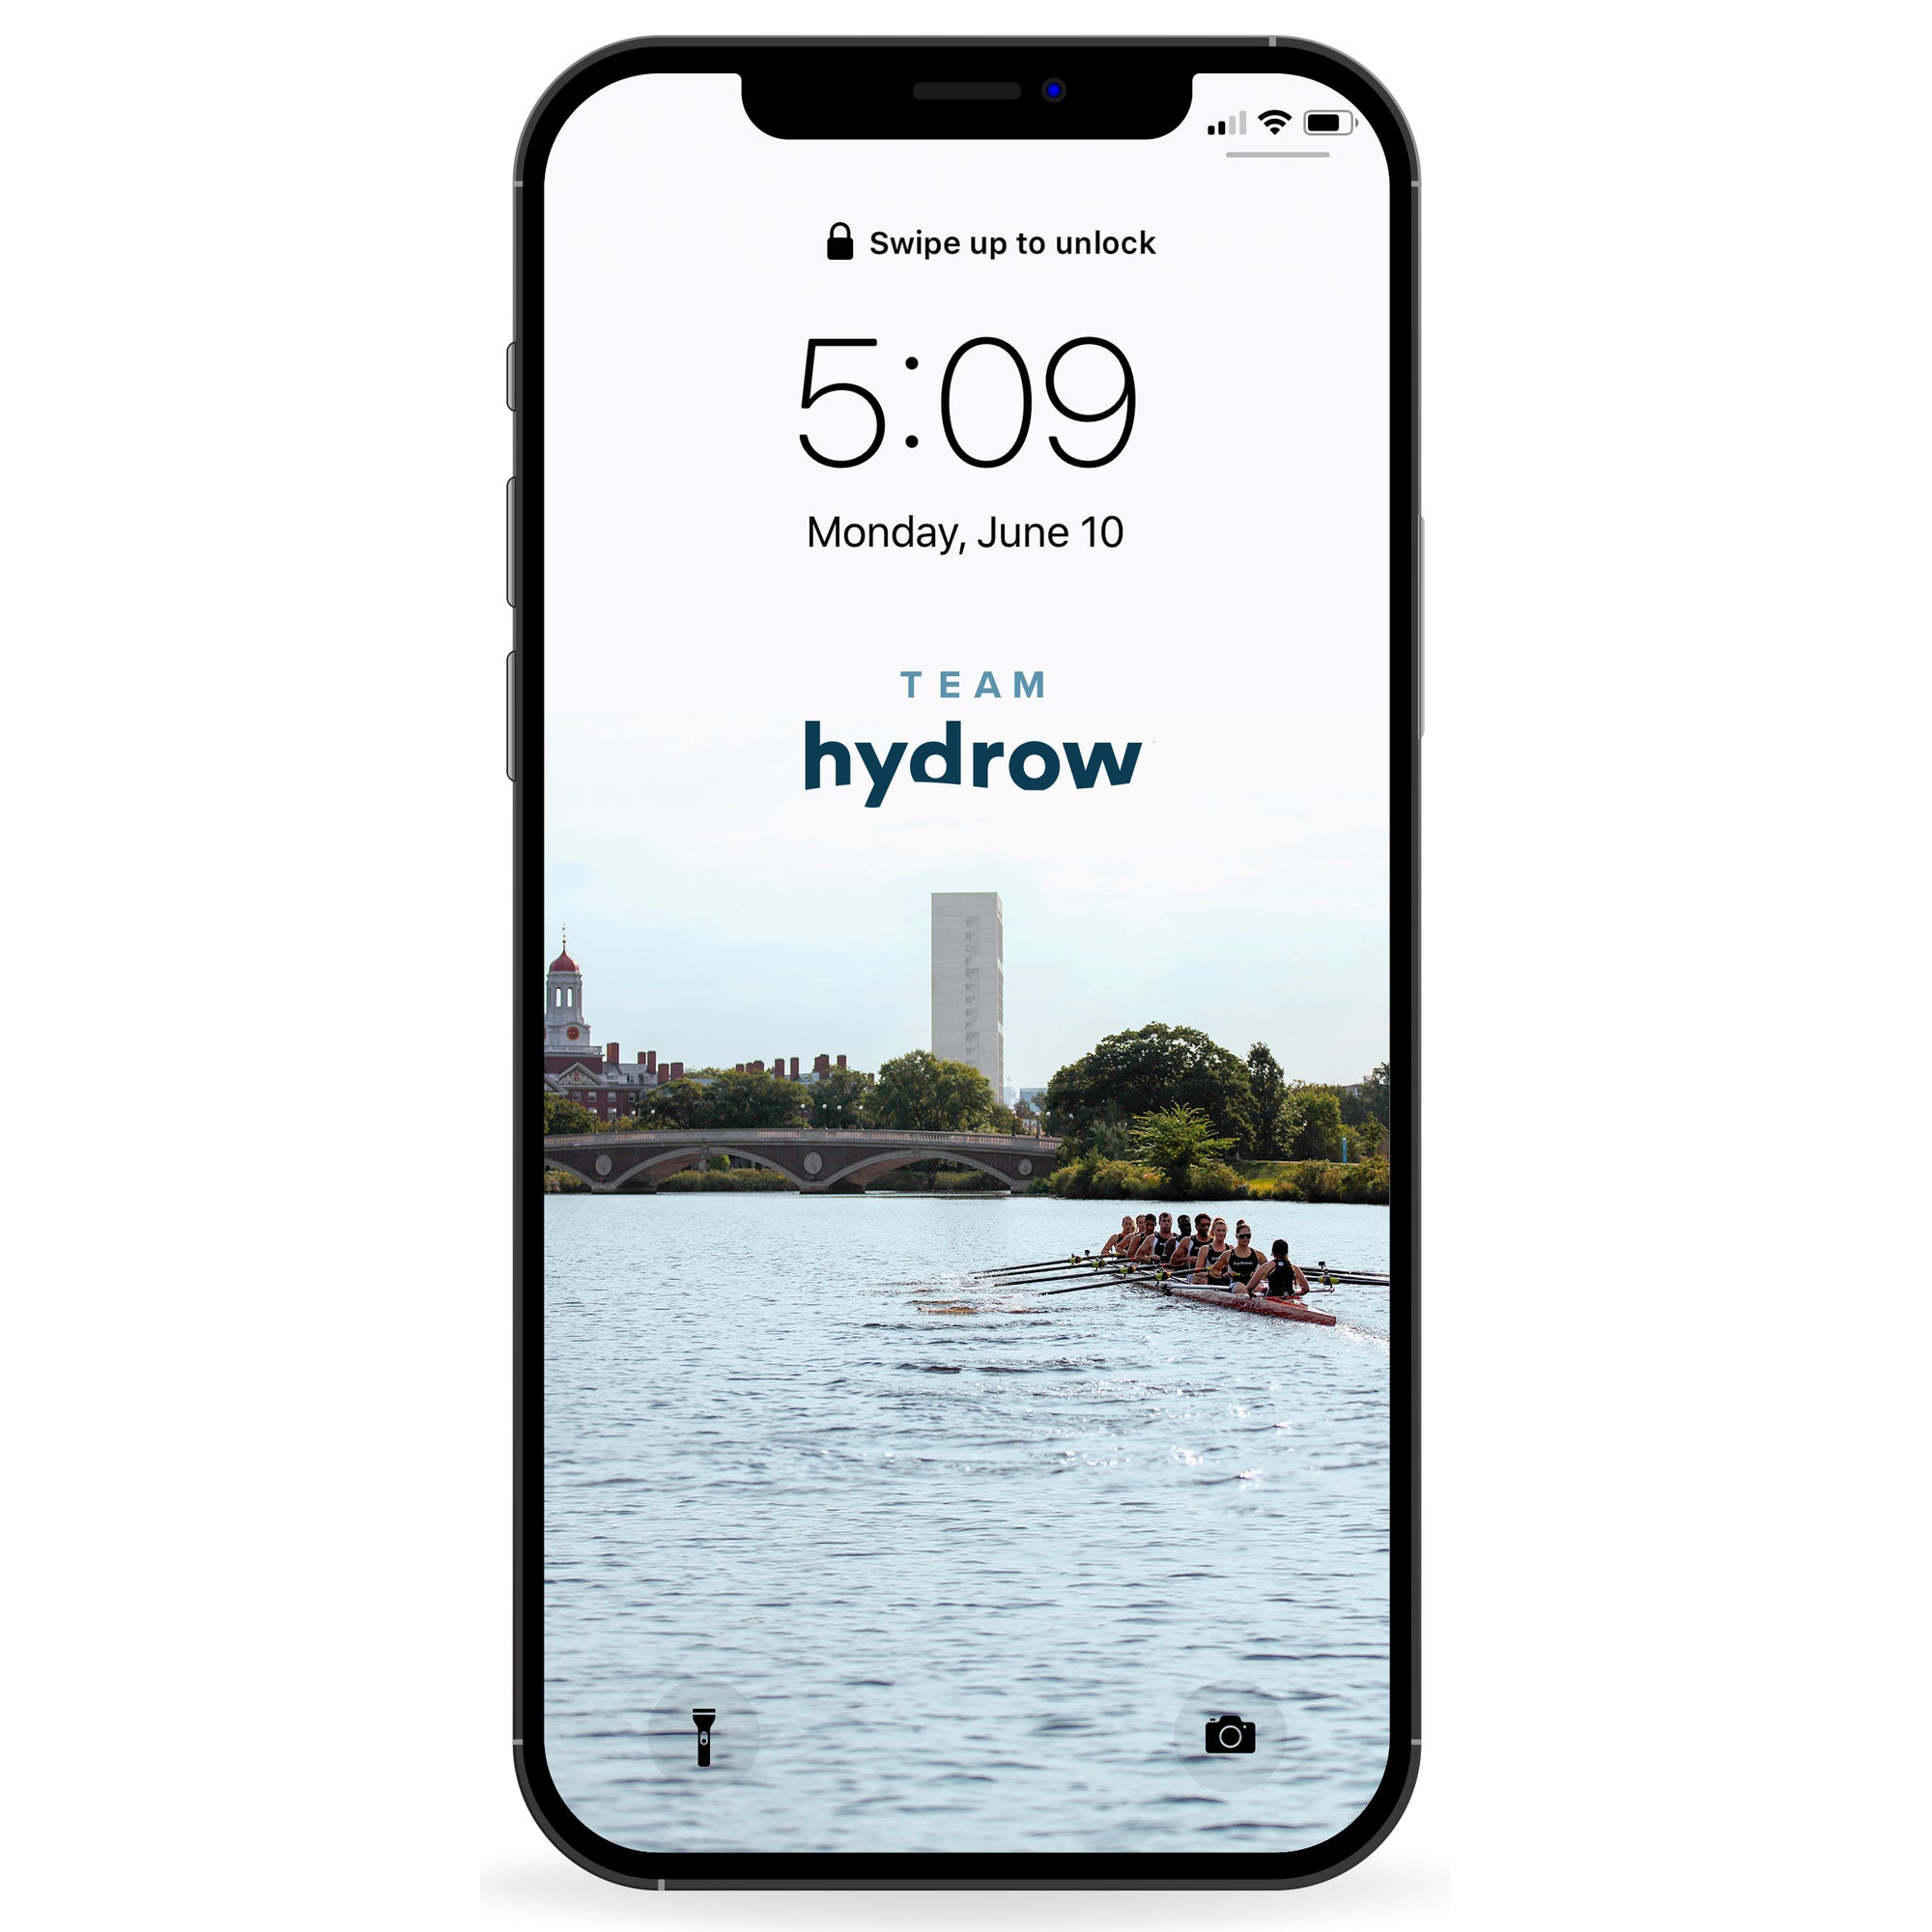 phone background featuring image of crew rowing in river and text "TEAM hydrow"